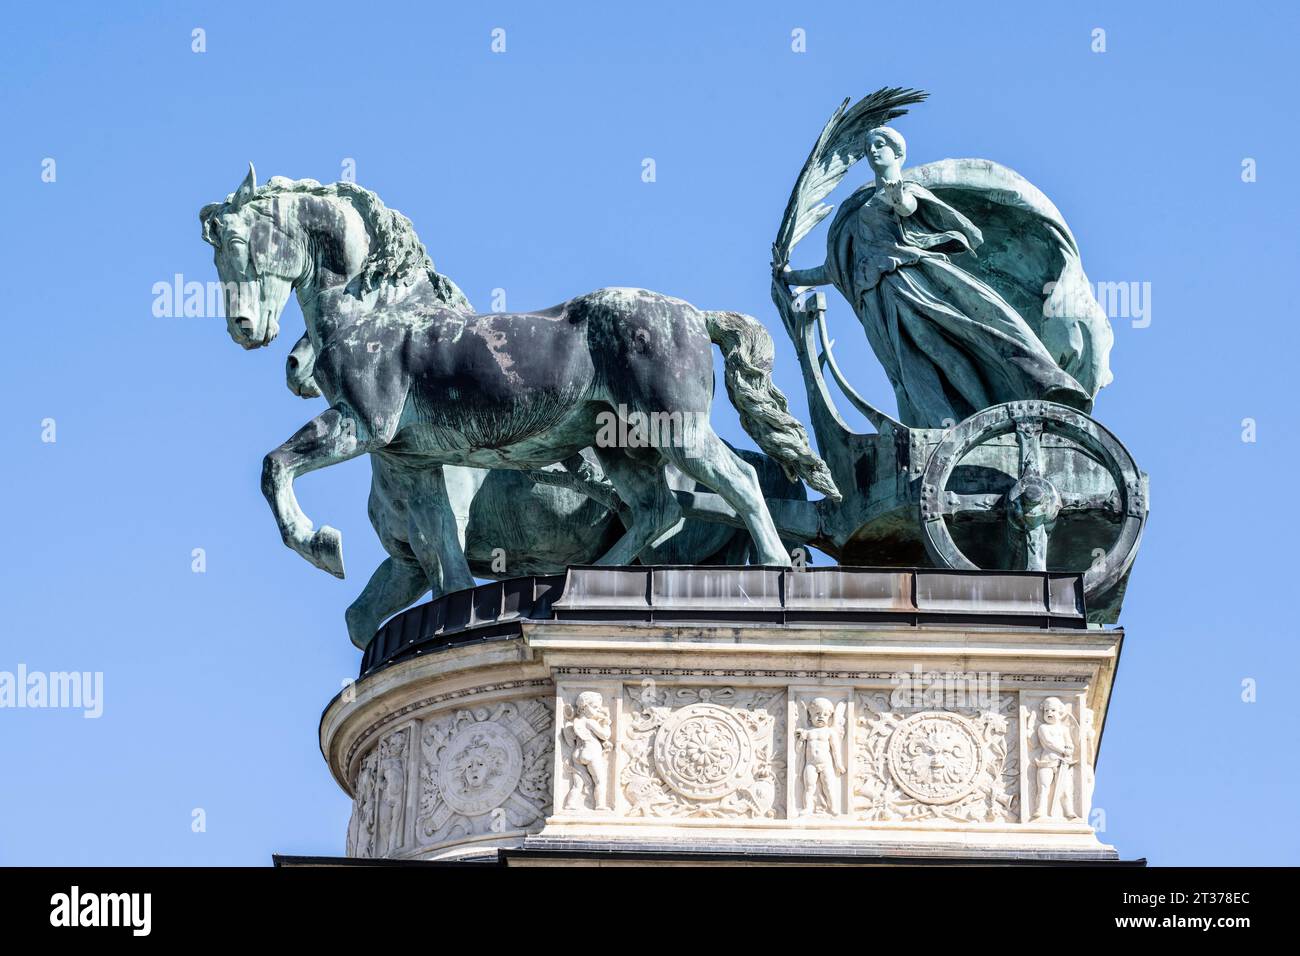 Sculpture on Heroes' Square, Budapest, Hungary Stock Photo